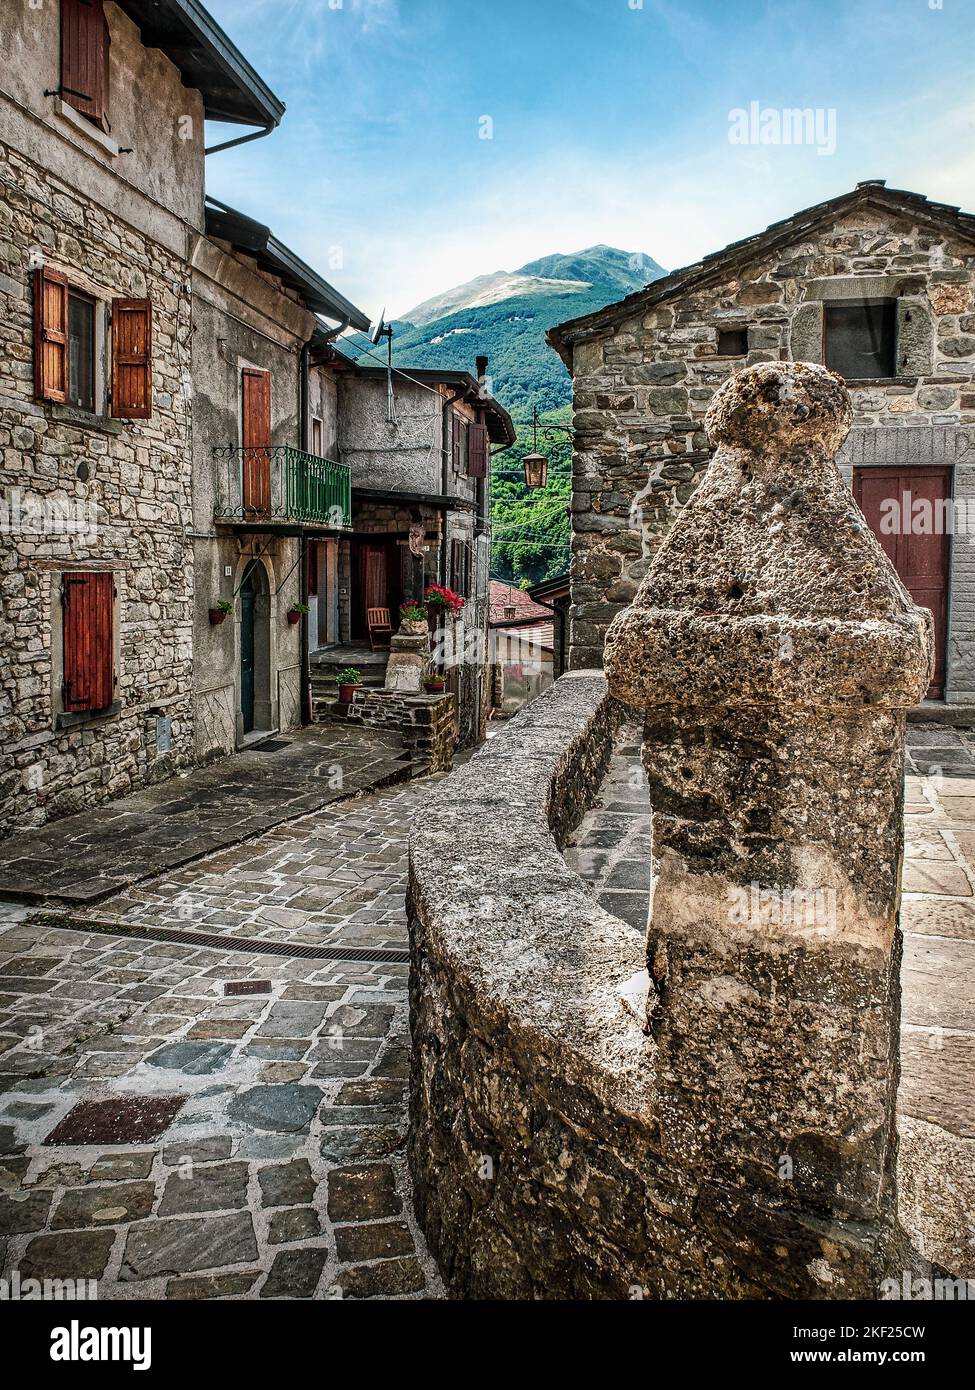 Cerreto Alpi, Reggio Apennines, Northern Italy. A narrow street in the ancient village with houses built with stones. Stock Photo